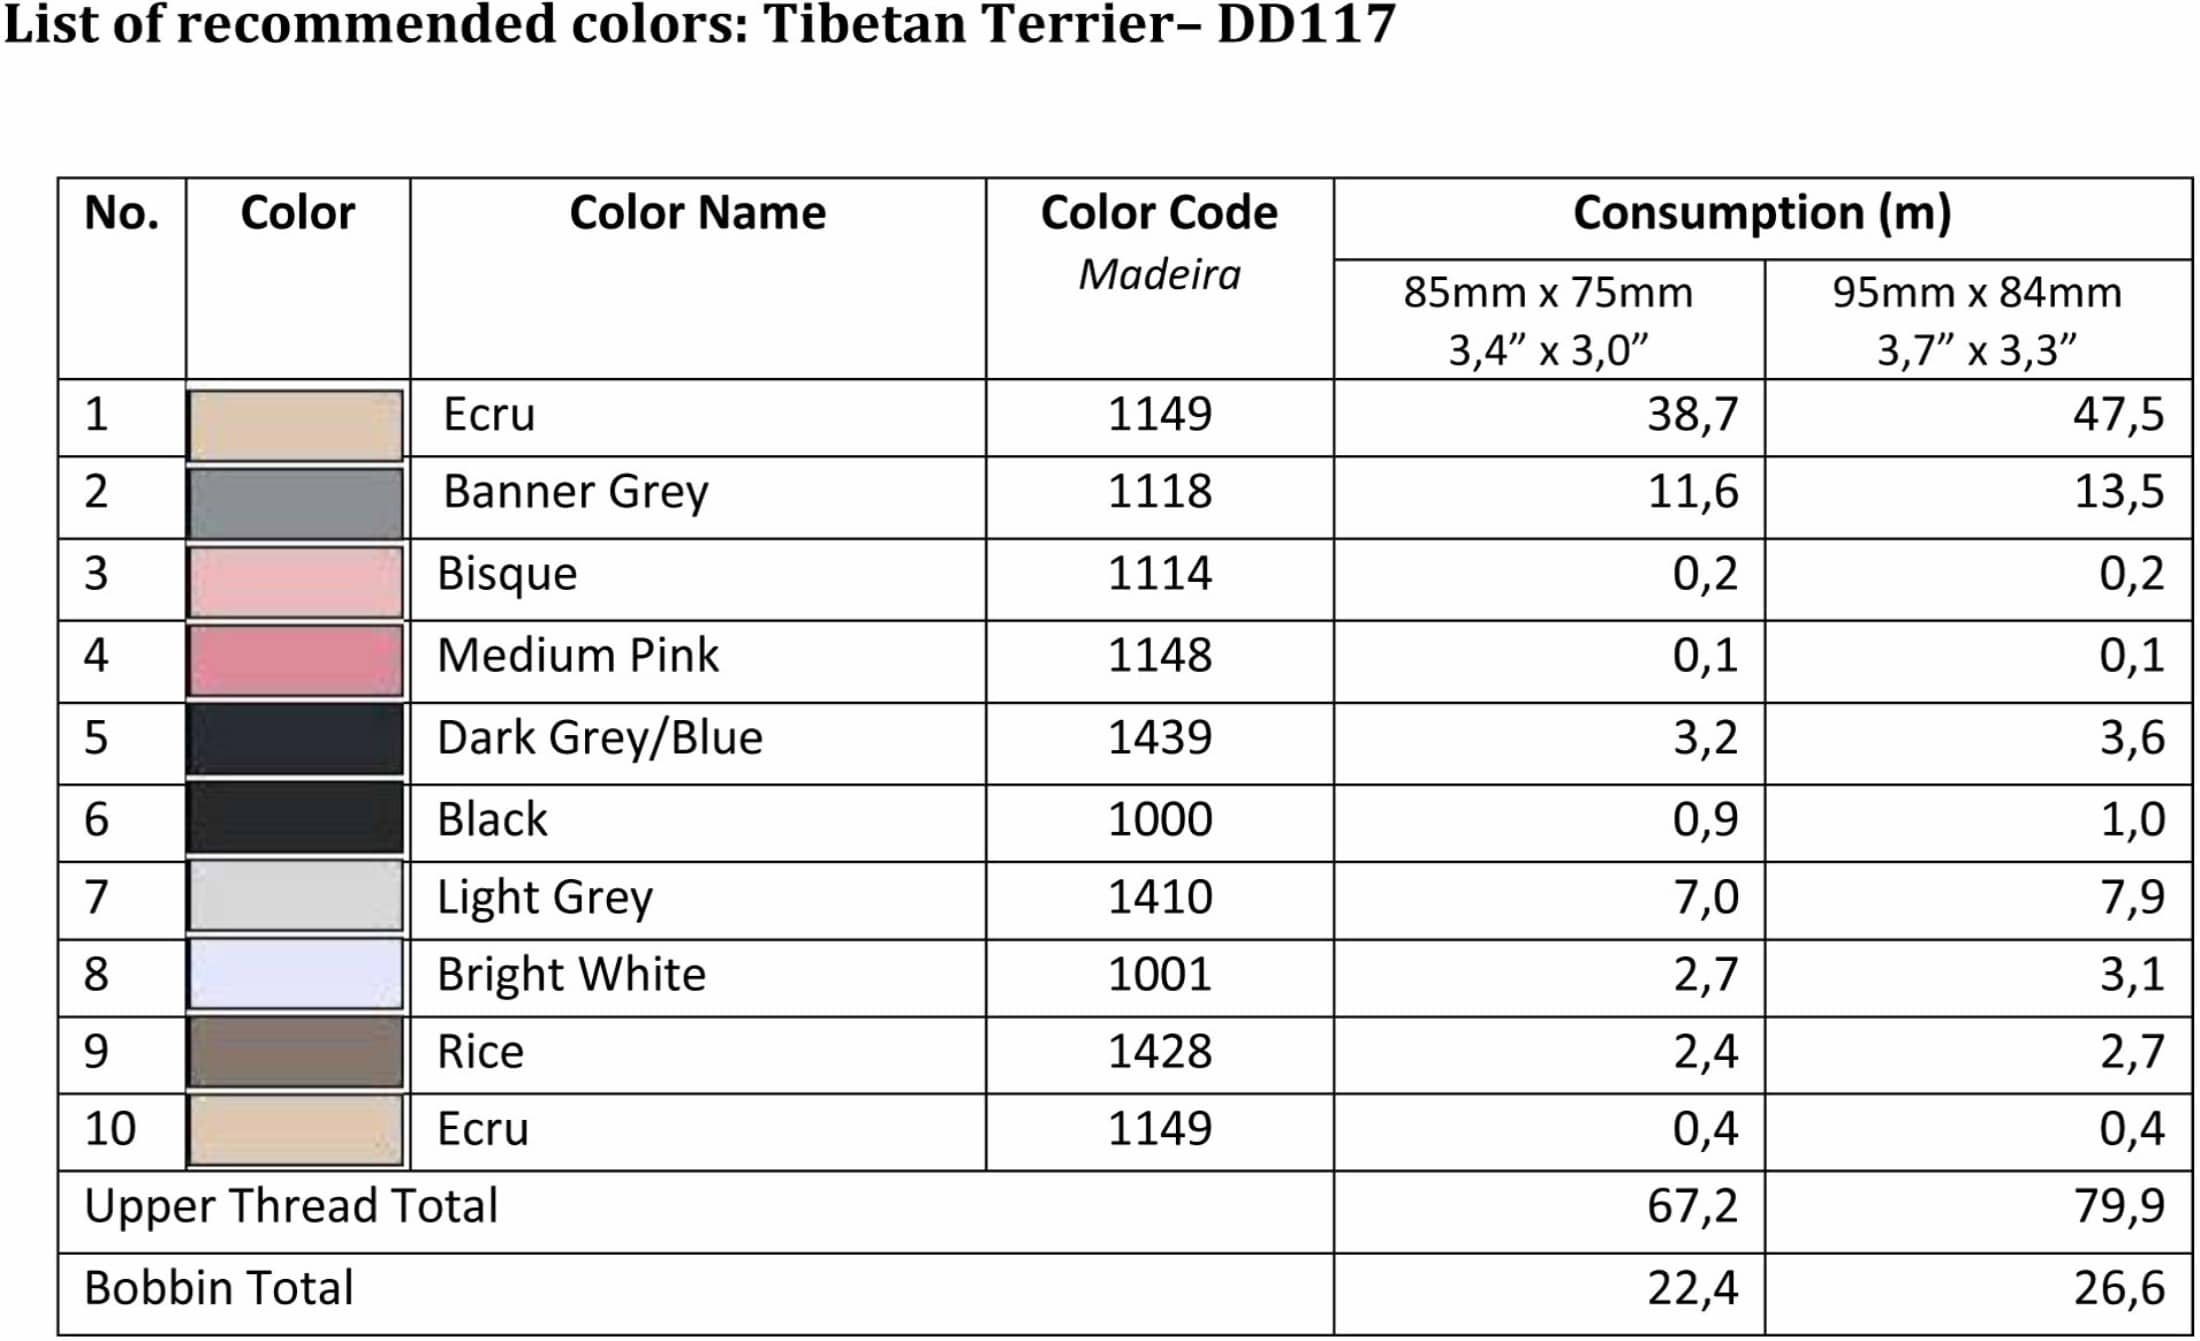 List of Recommended Colors - Tibetan Terrier DD117